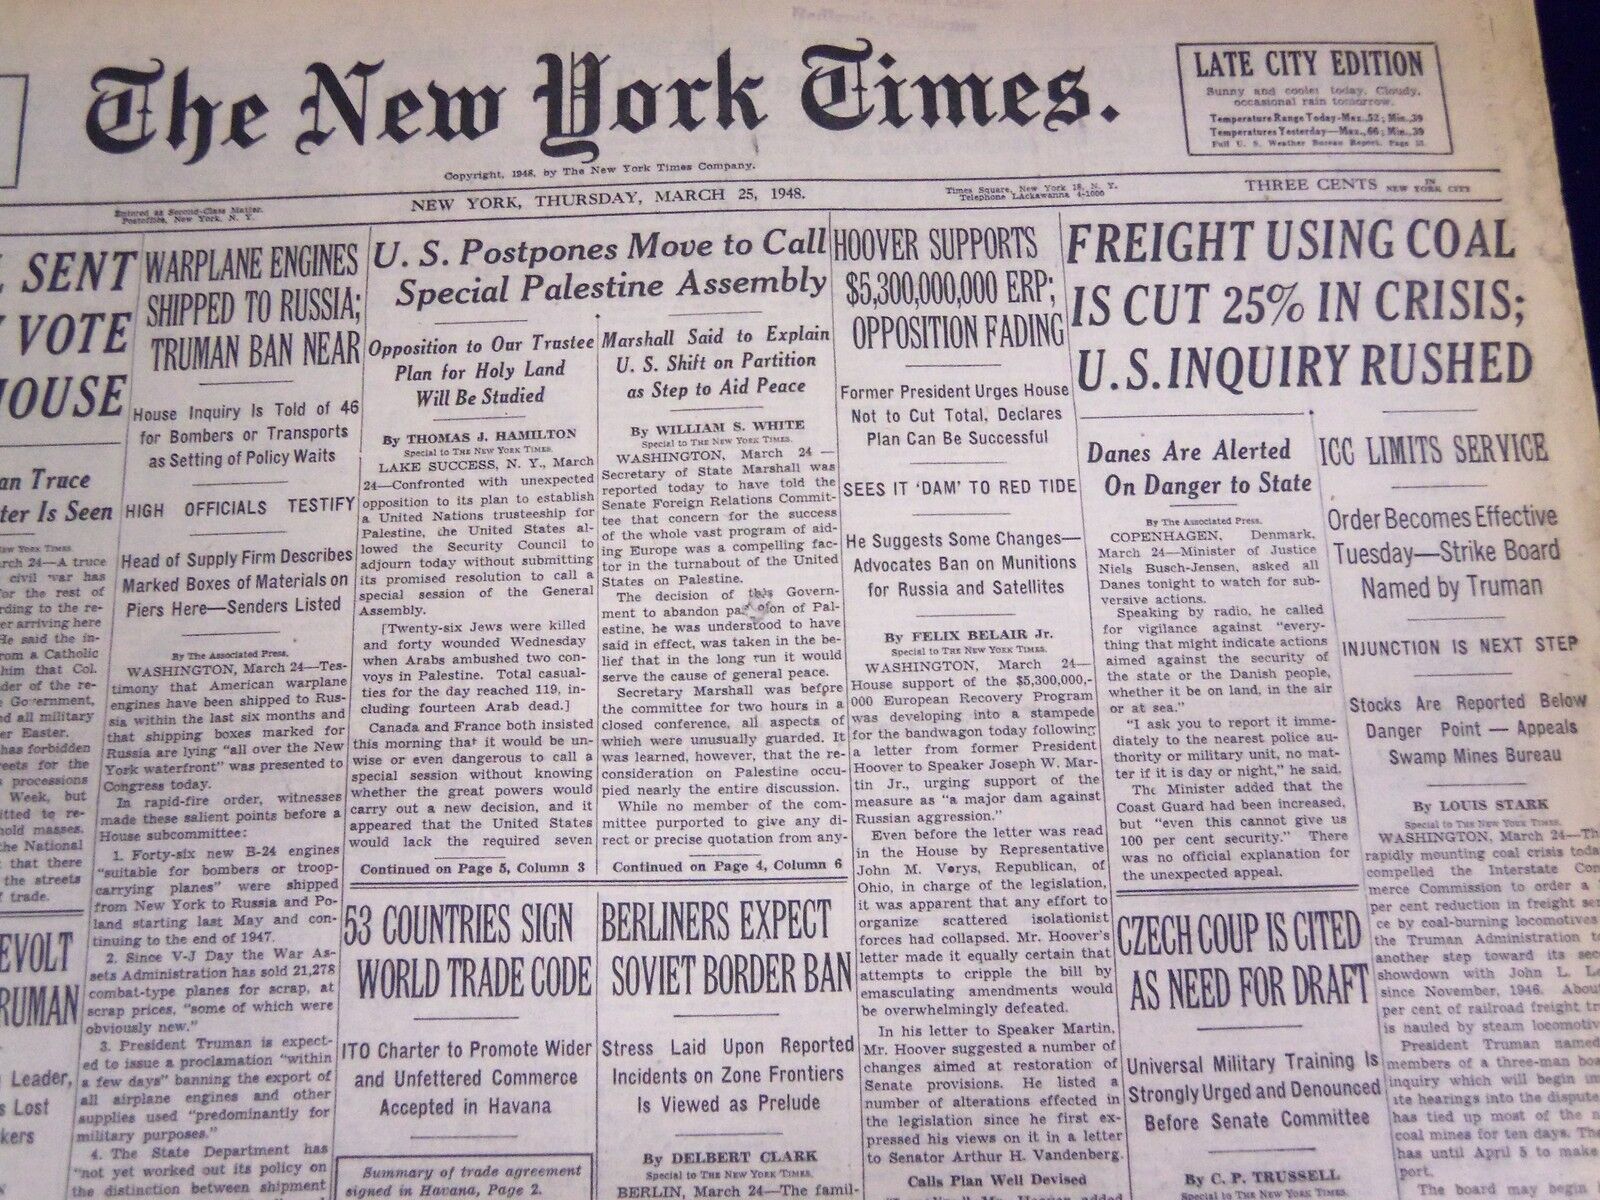 1948 MARCH 25 NEW YORK TIMES - FREIGHT USING COAL IS CUT - NT 3749